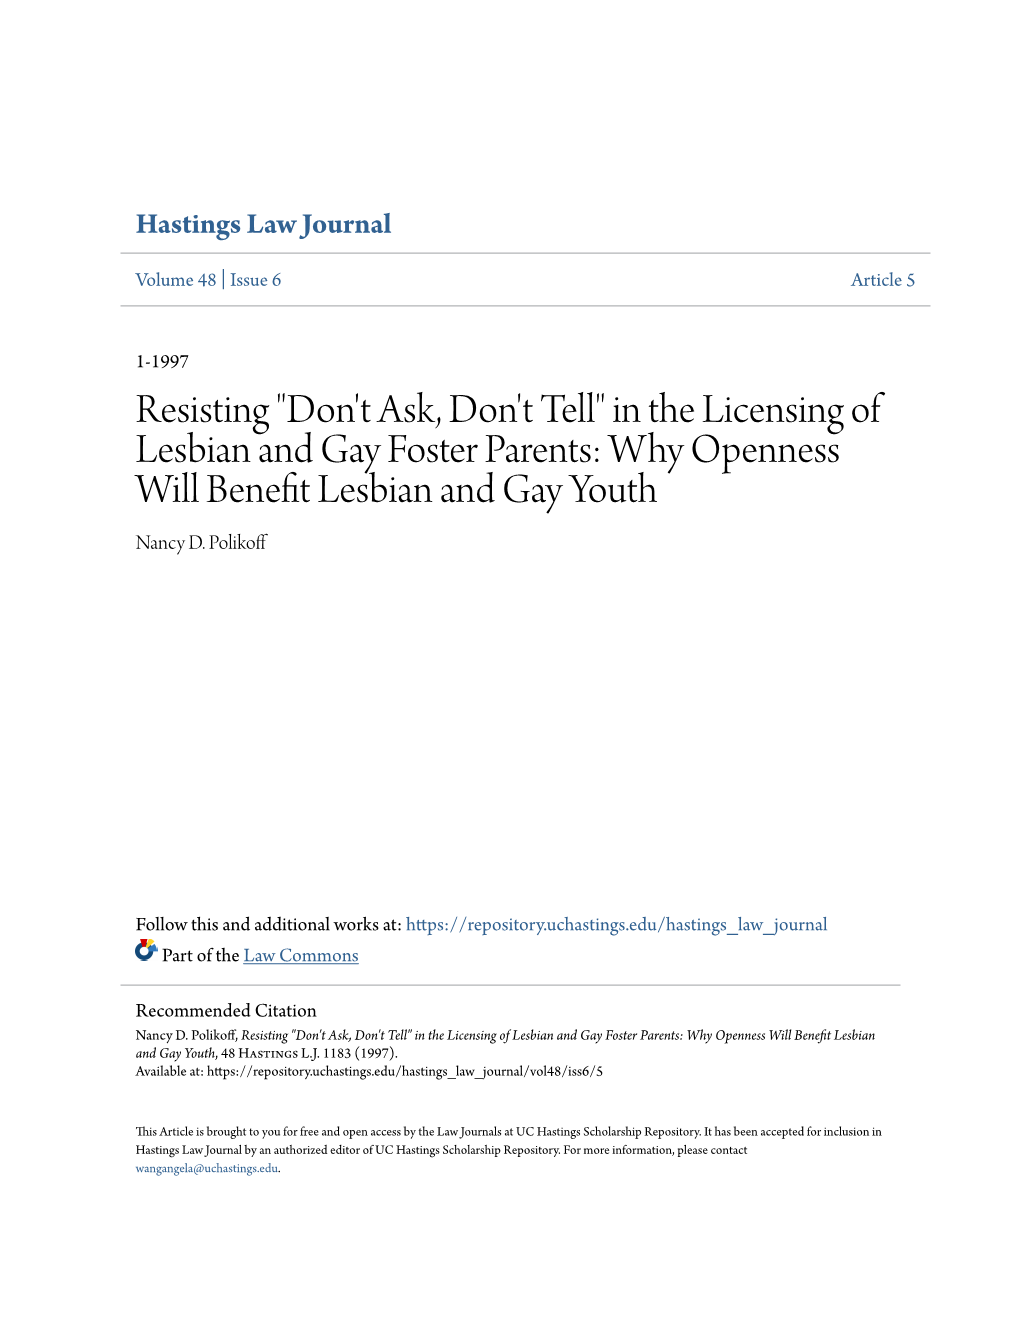 In the Licensing of Lesbian and Gay Foster Parents: Why Openness Will Benefit Lesbian and Gay Youth Nancy D